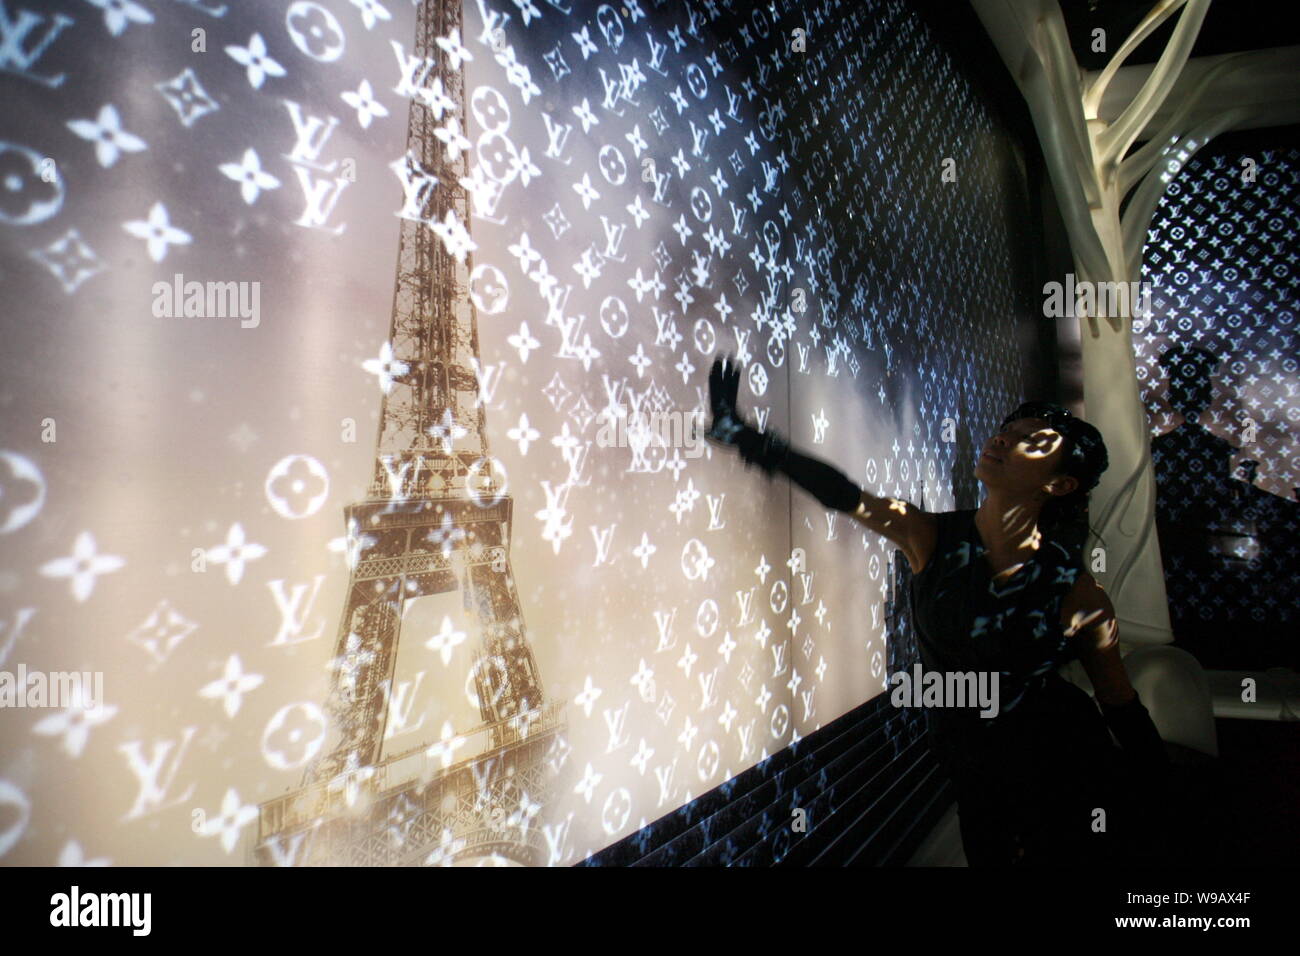 A model looks at logos of Louis Vuitton projected on a wall at the Louis  Vuitton area inside the France Pavilion in the Expo site in Shanghai, China  Stock Photo - Alamy